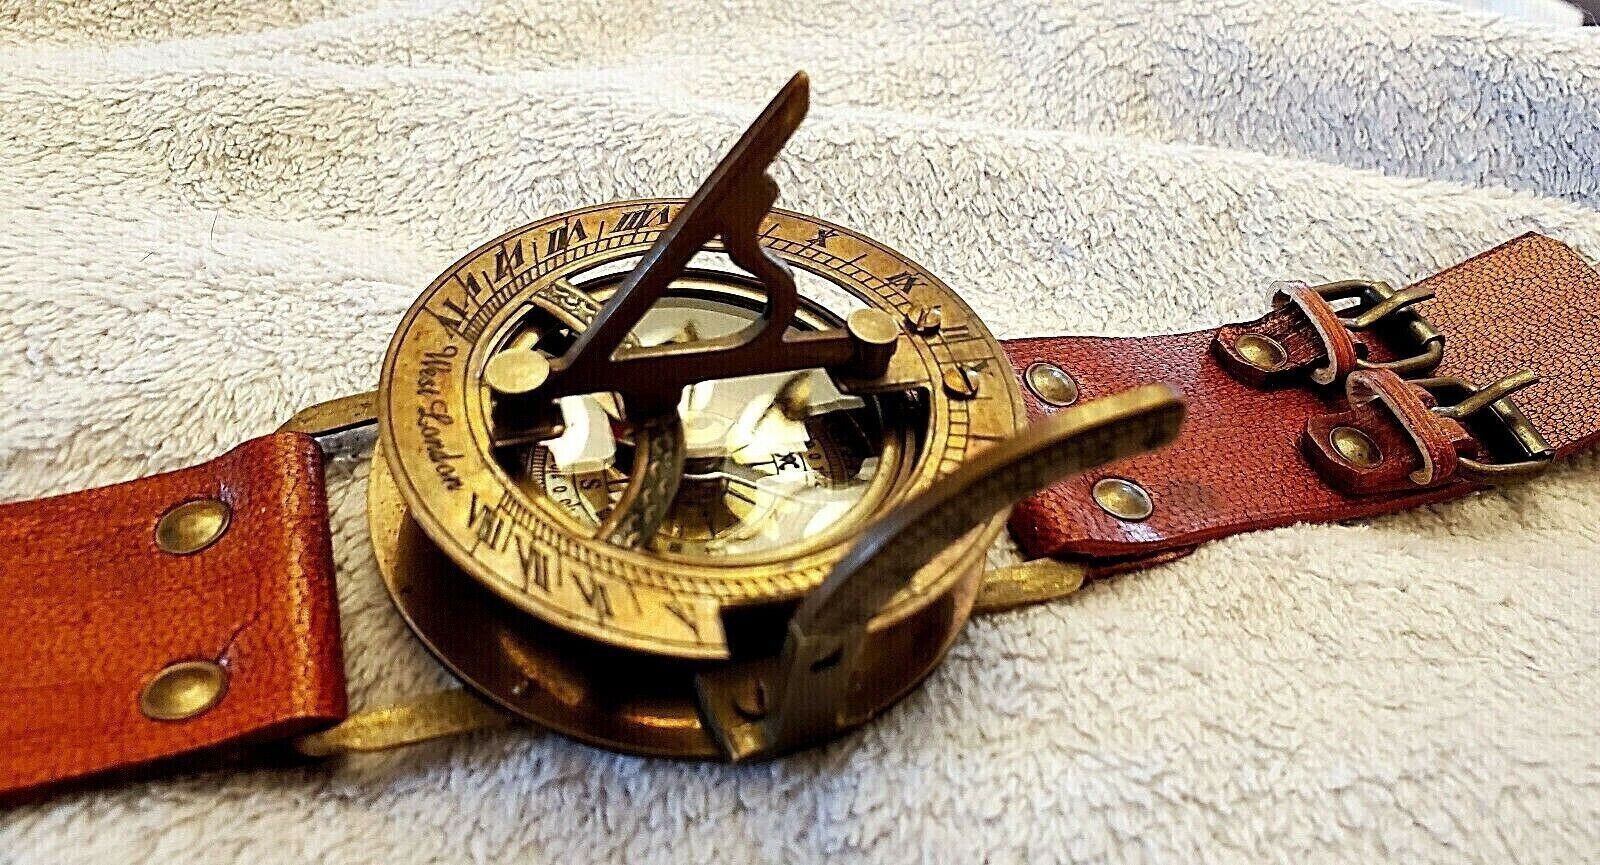 Vintage Old Style WWII Military Wristwatch Brass Round Sundial Compass Gift.